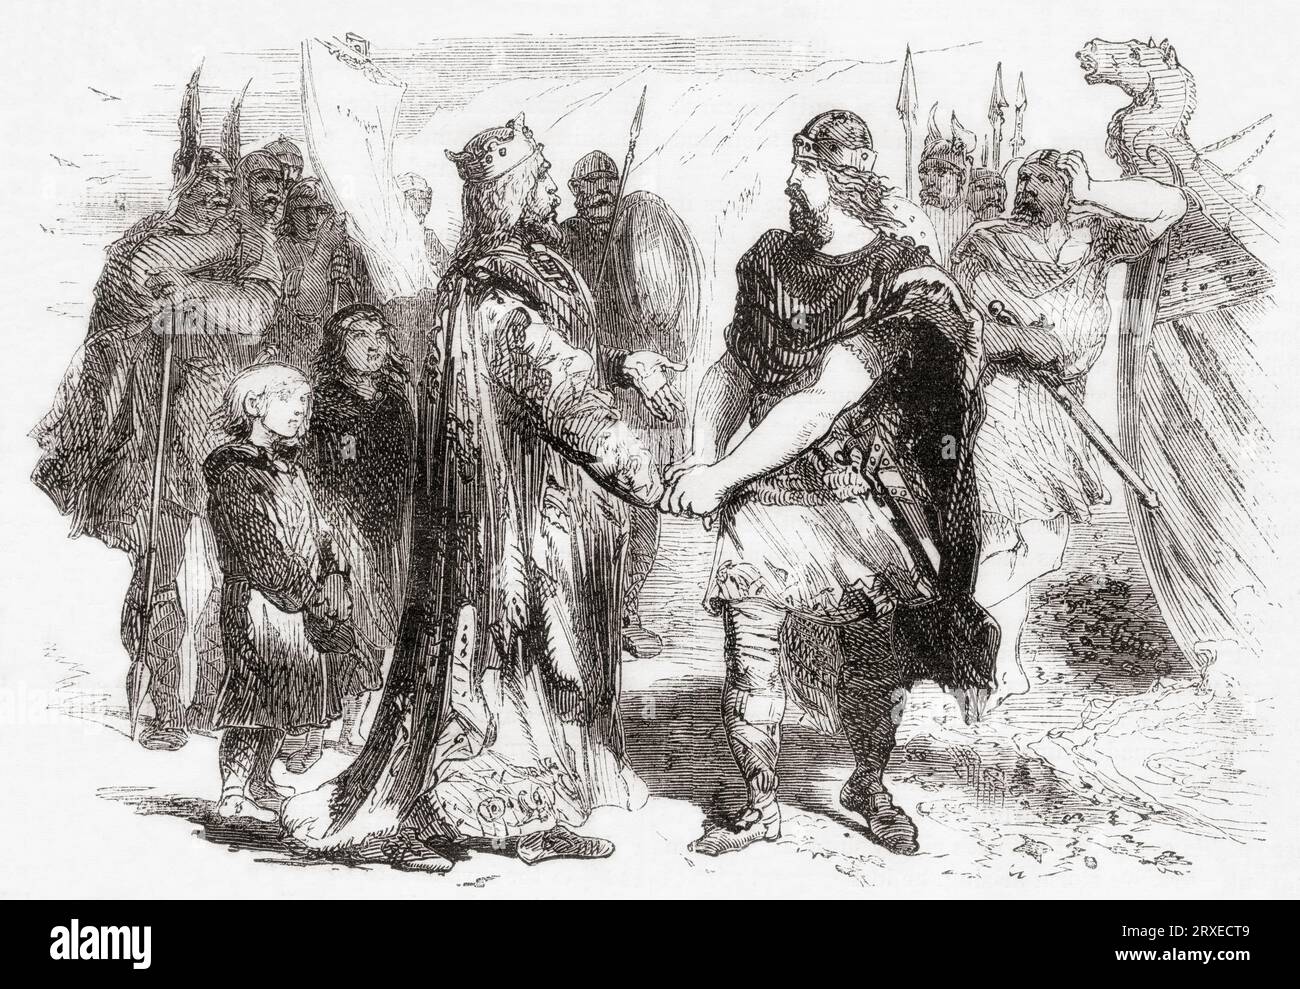 The meeting of Edmund Ironside and King Cnut on the island of Alnery in the River Severn after Edmund's defeat at the Battle of Assandun in 1016, to negotiate peace and divide the country between them.  Edmund Ironside, c. 990 –1016, aka Edmund II.  King of the English. Cnut, c. 990 – 1035, aka Cnut the Great and Canute. King of England from 1016, King of Denmark from 1018, and King of Norway from 1028 until his death in 1035.  From Cassell's Illustrated History of England, published 1857. Stock Photo